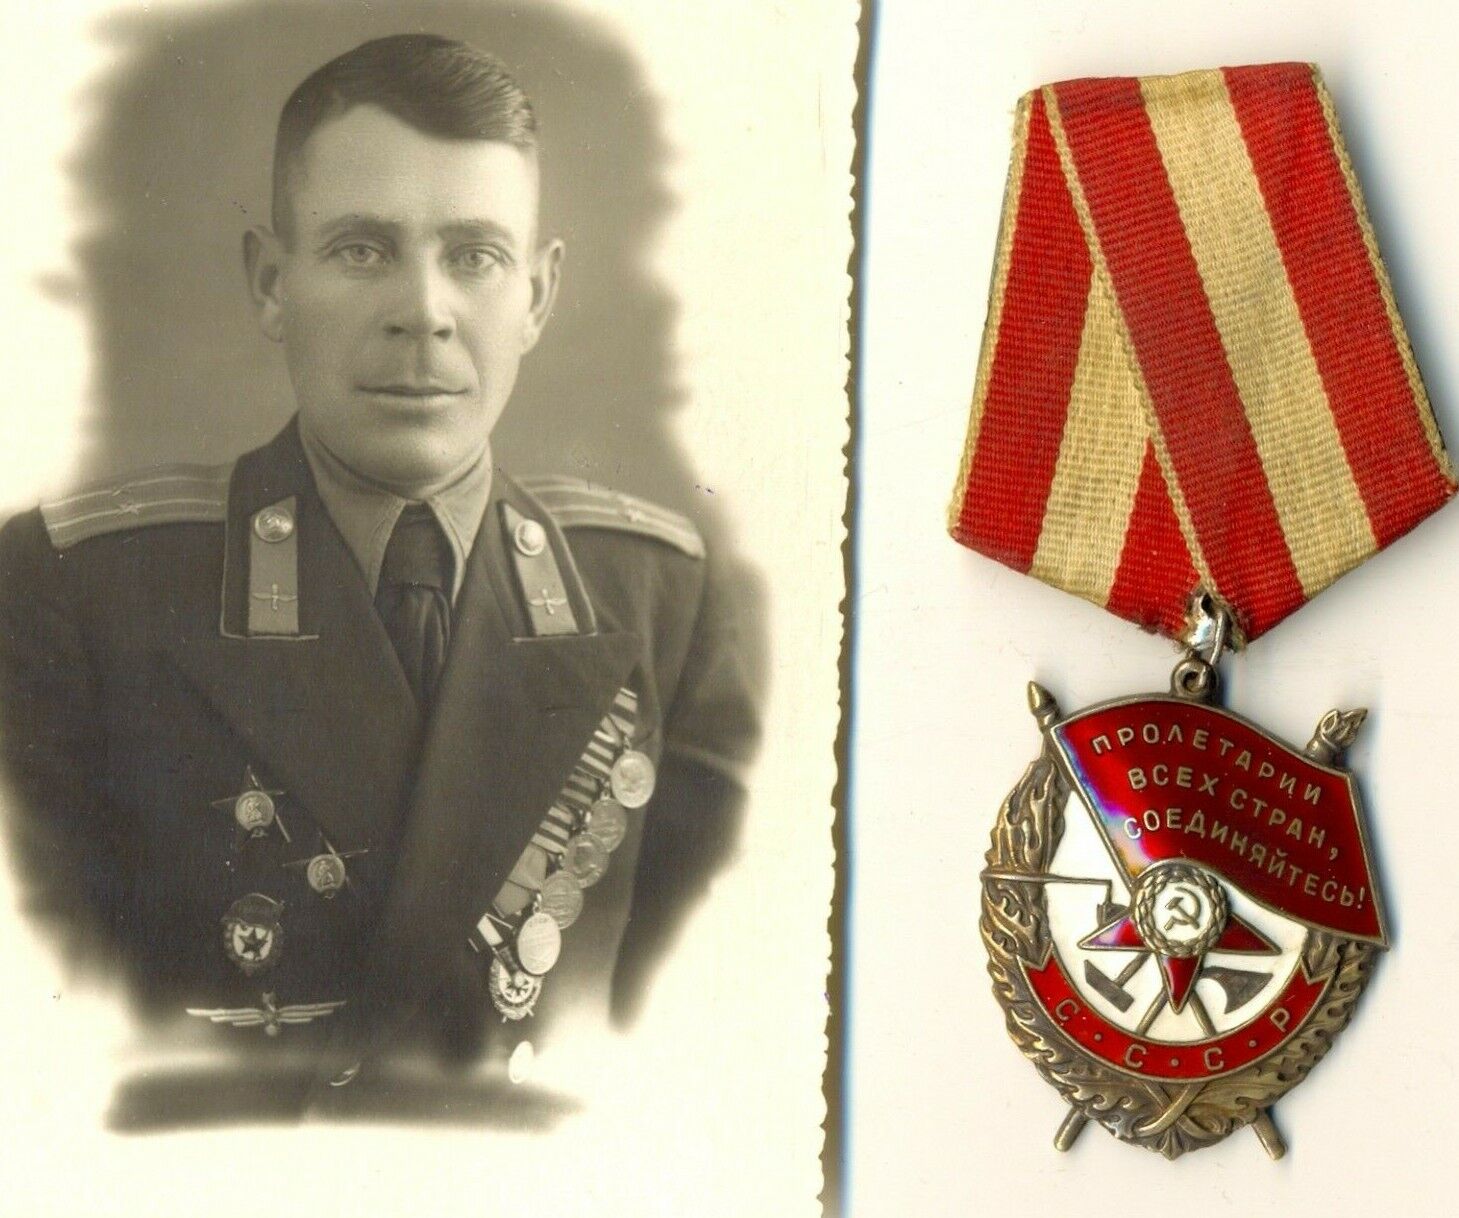 Russian Soviet Medal Order Badge Red Banner Last issue and photo 504628 (#1942a)